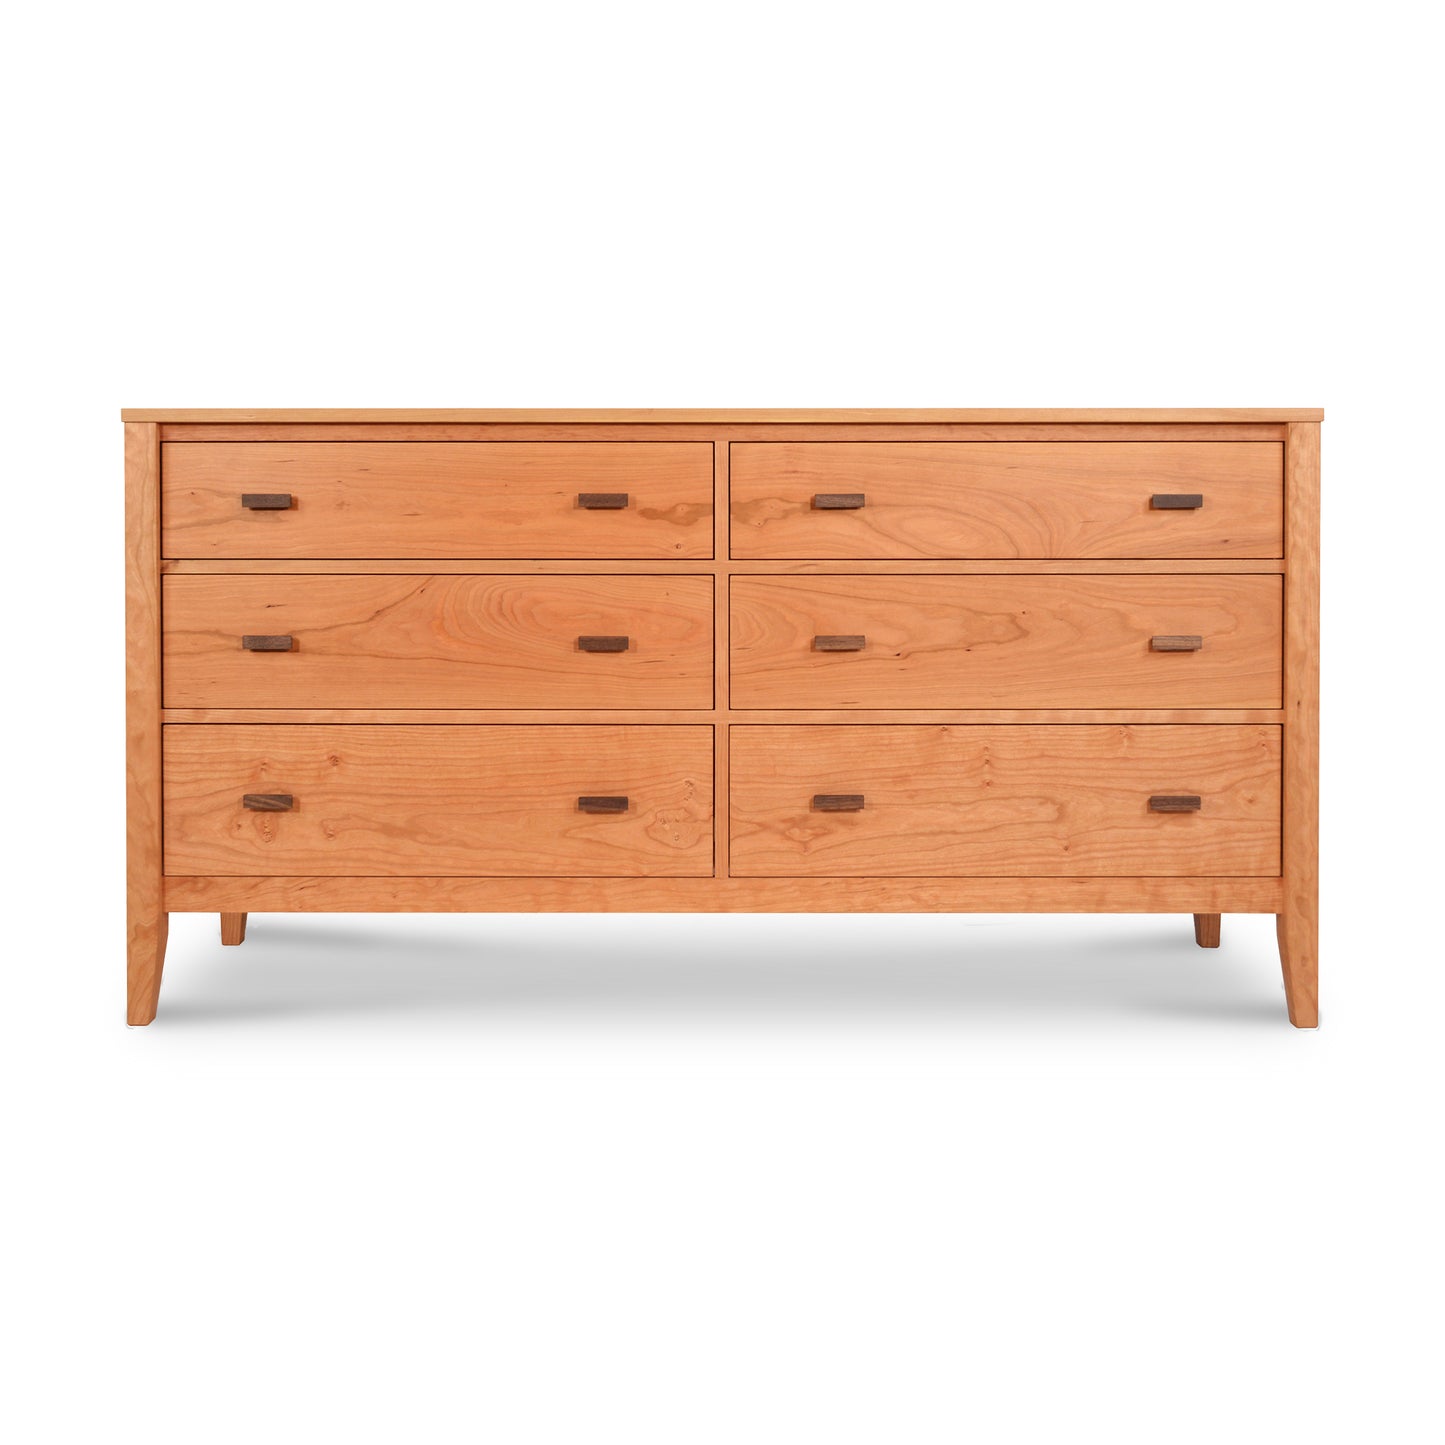 Sentence revised: A Maple Corner Woodworks Andover Modern 6-Drawer Dresser crafted from eco-friendly, natural cherry wood with simple, rectangular handles on a white background.